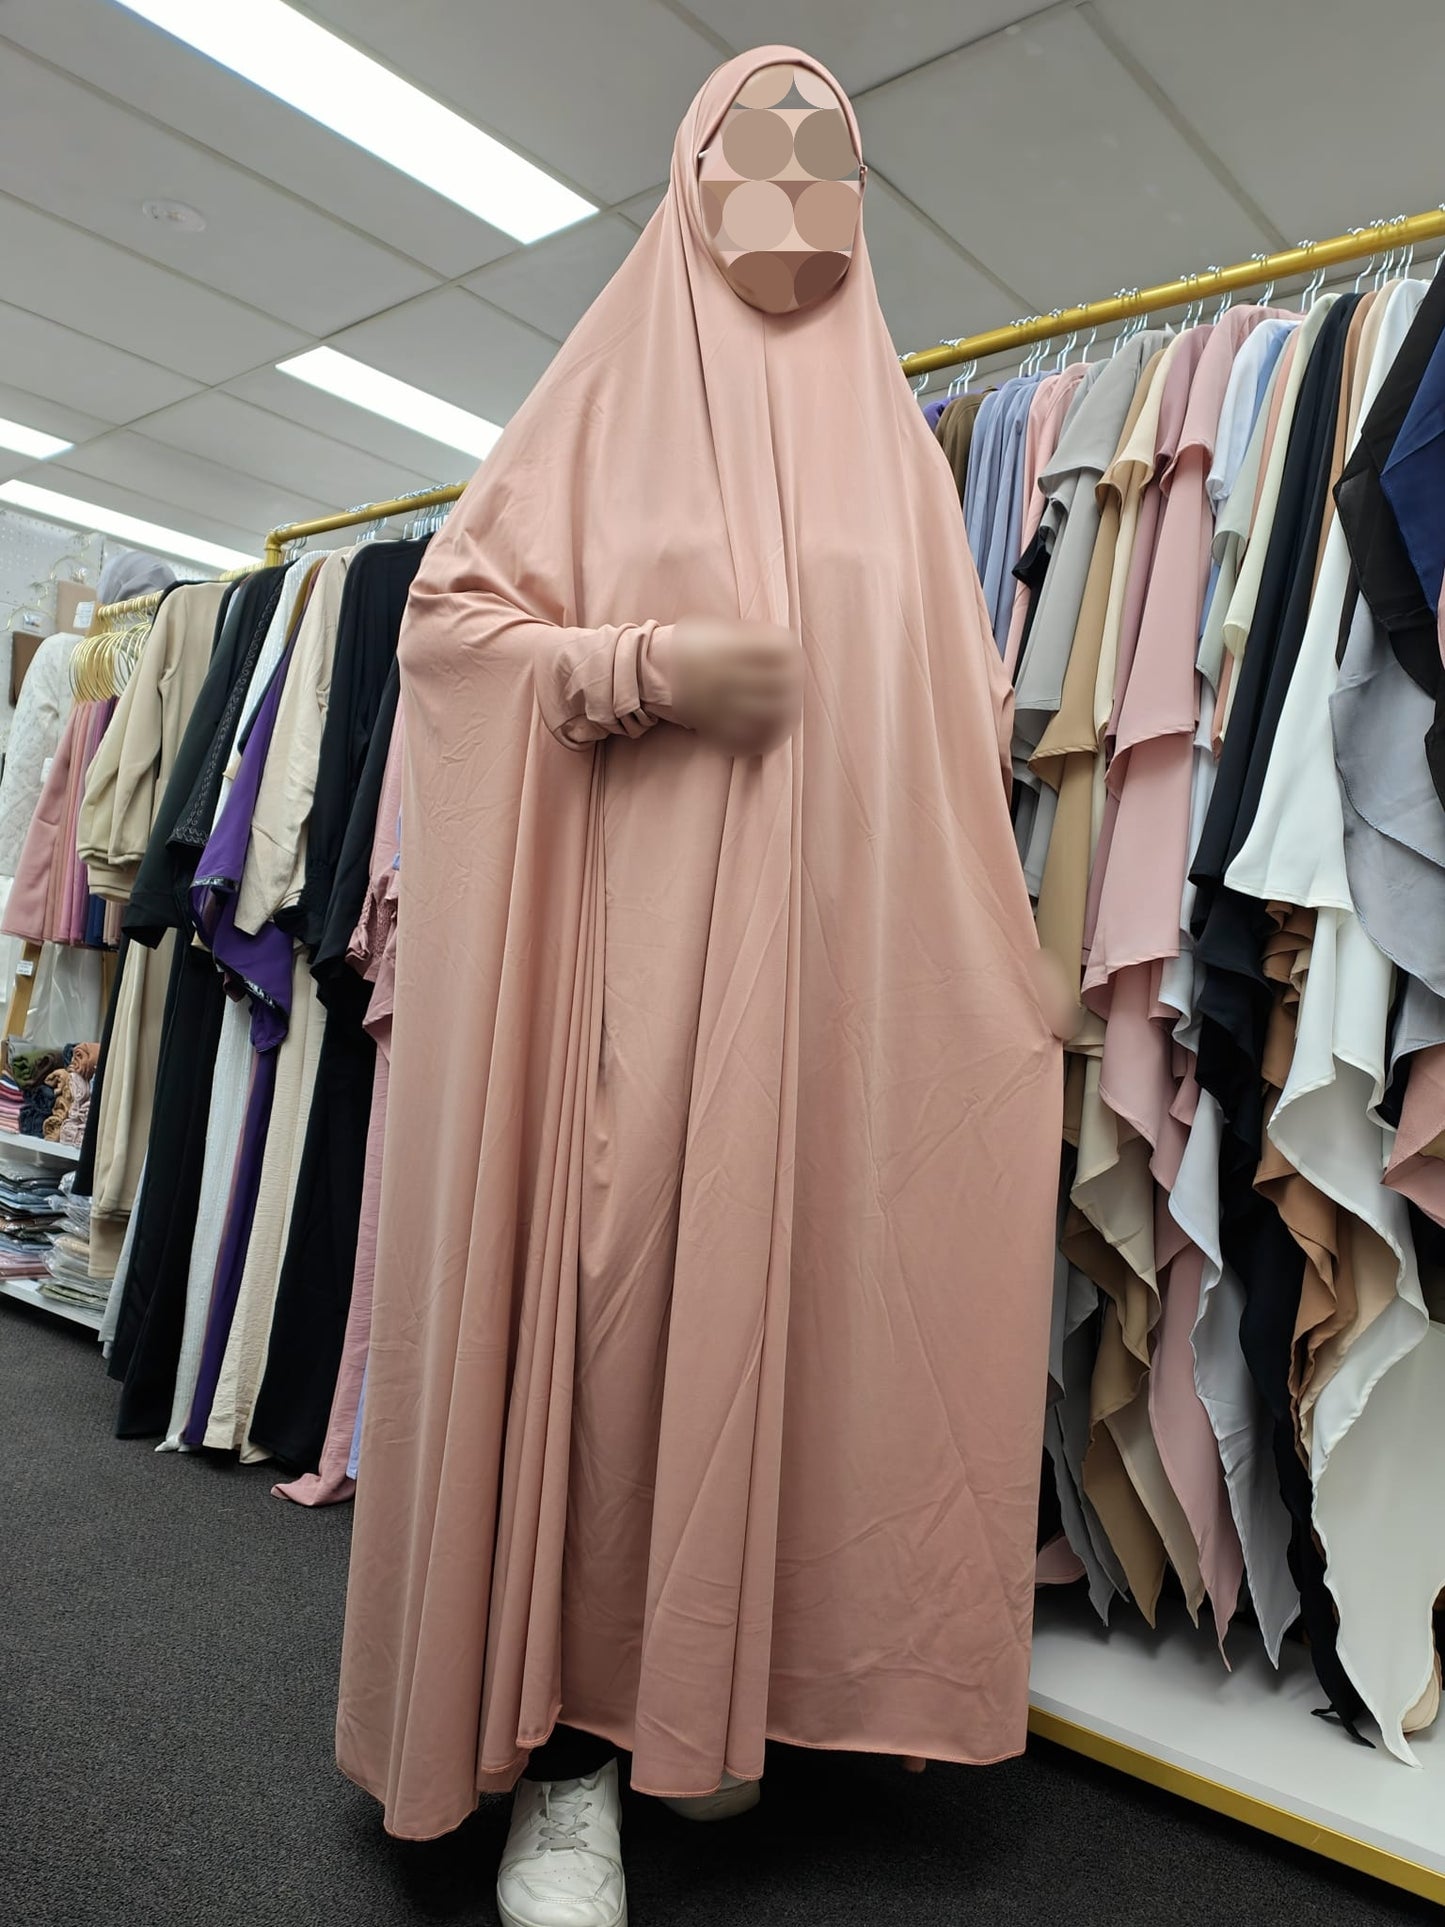 Elevate your modest wear with our Premium Coral Pink Jilbab, crafted from luxurious ITY Knit fabric for exceptional comfort and style. Shop now at Hikmah Boutique for this ankle-length, non-see-through jilbab at a reasonable price.